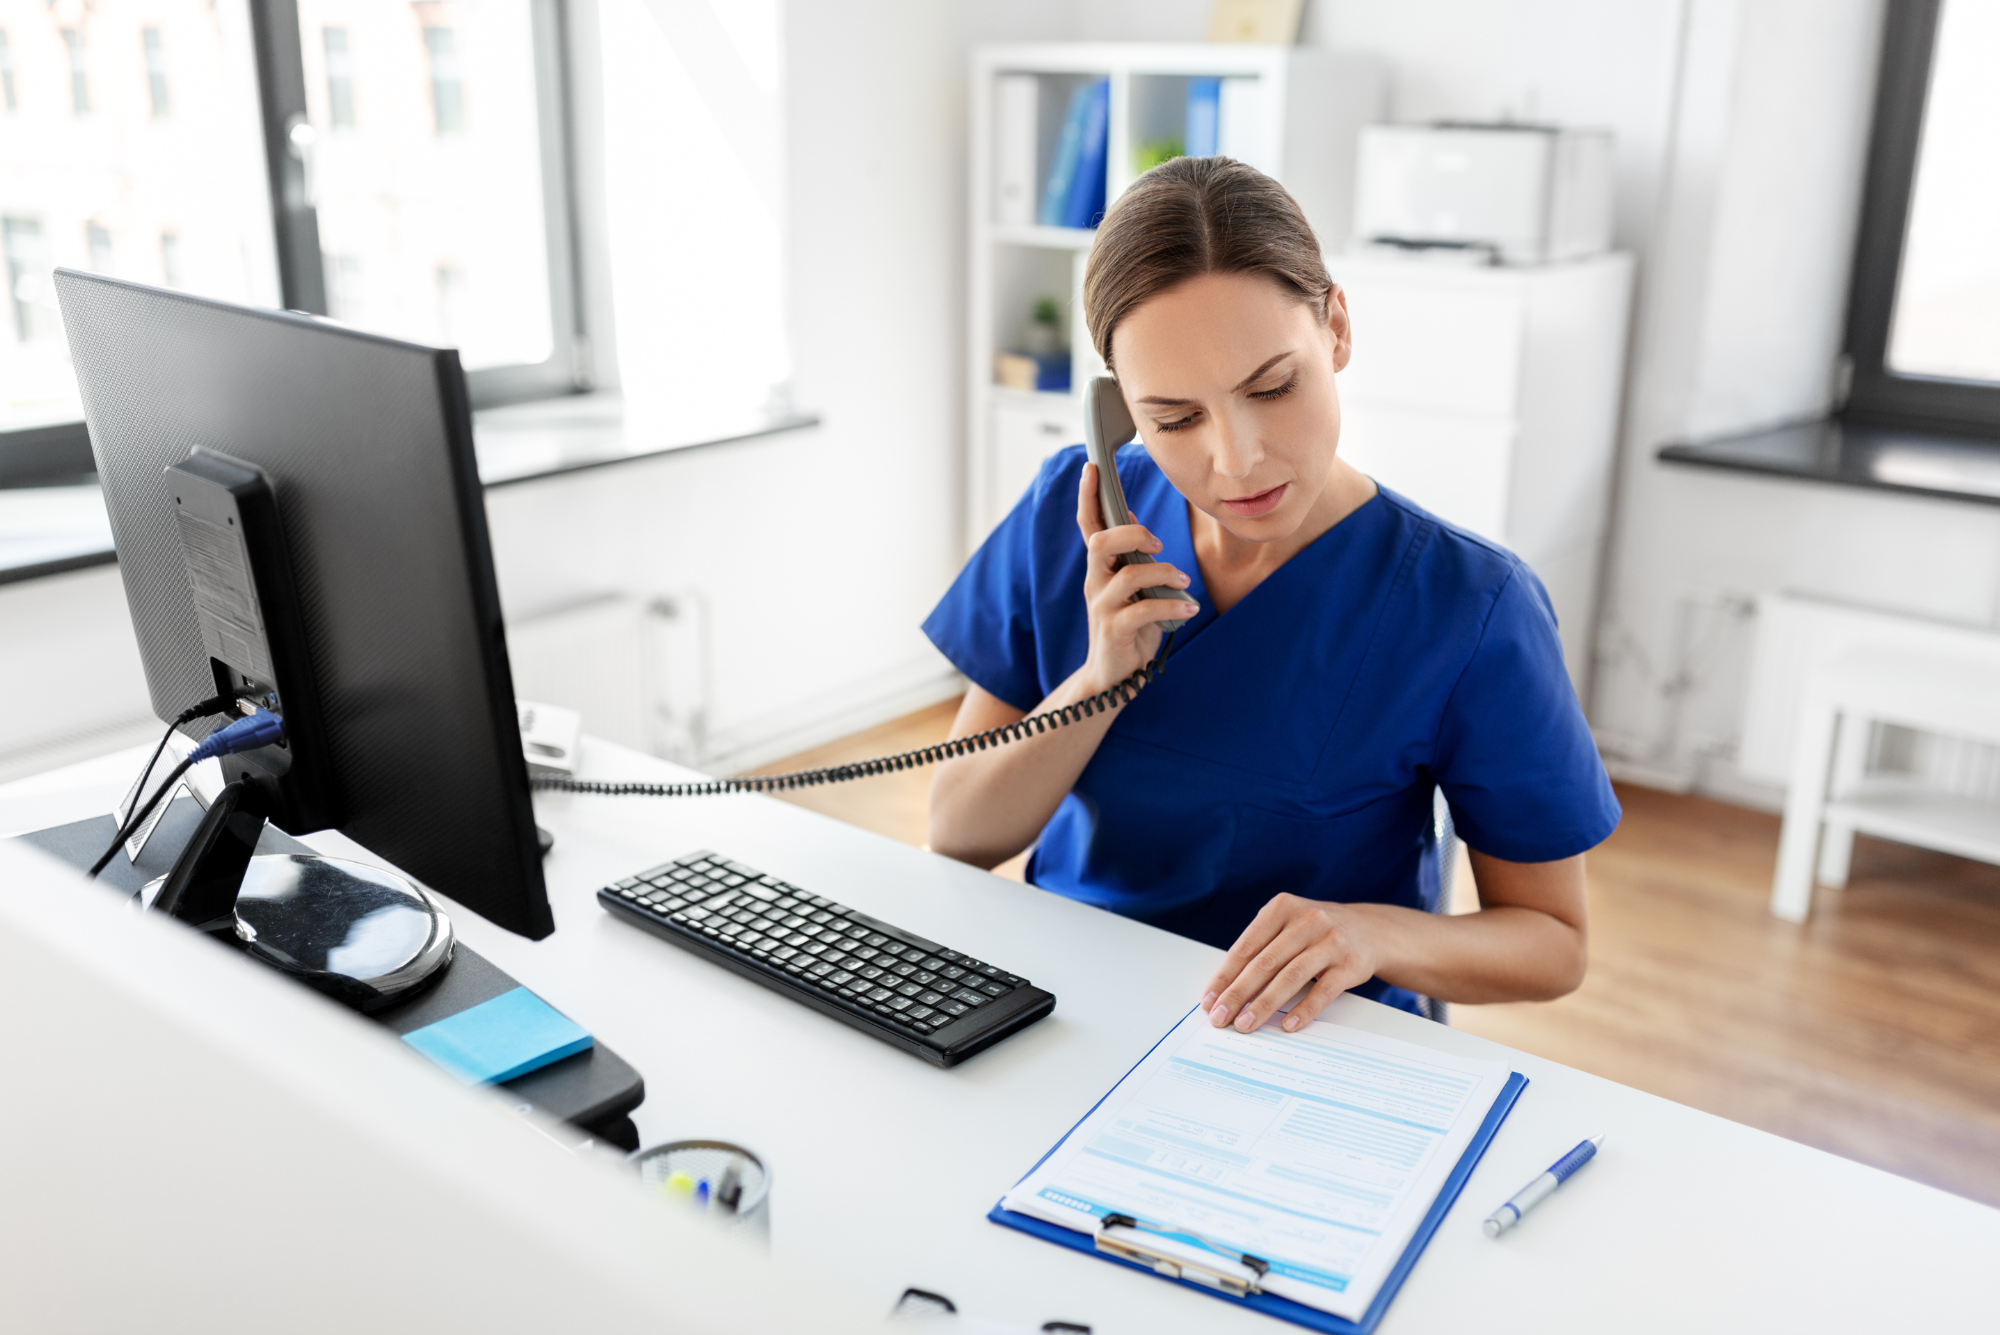 A patient liaison wearing blue scrubs talks on the phone at a white desk.